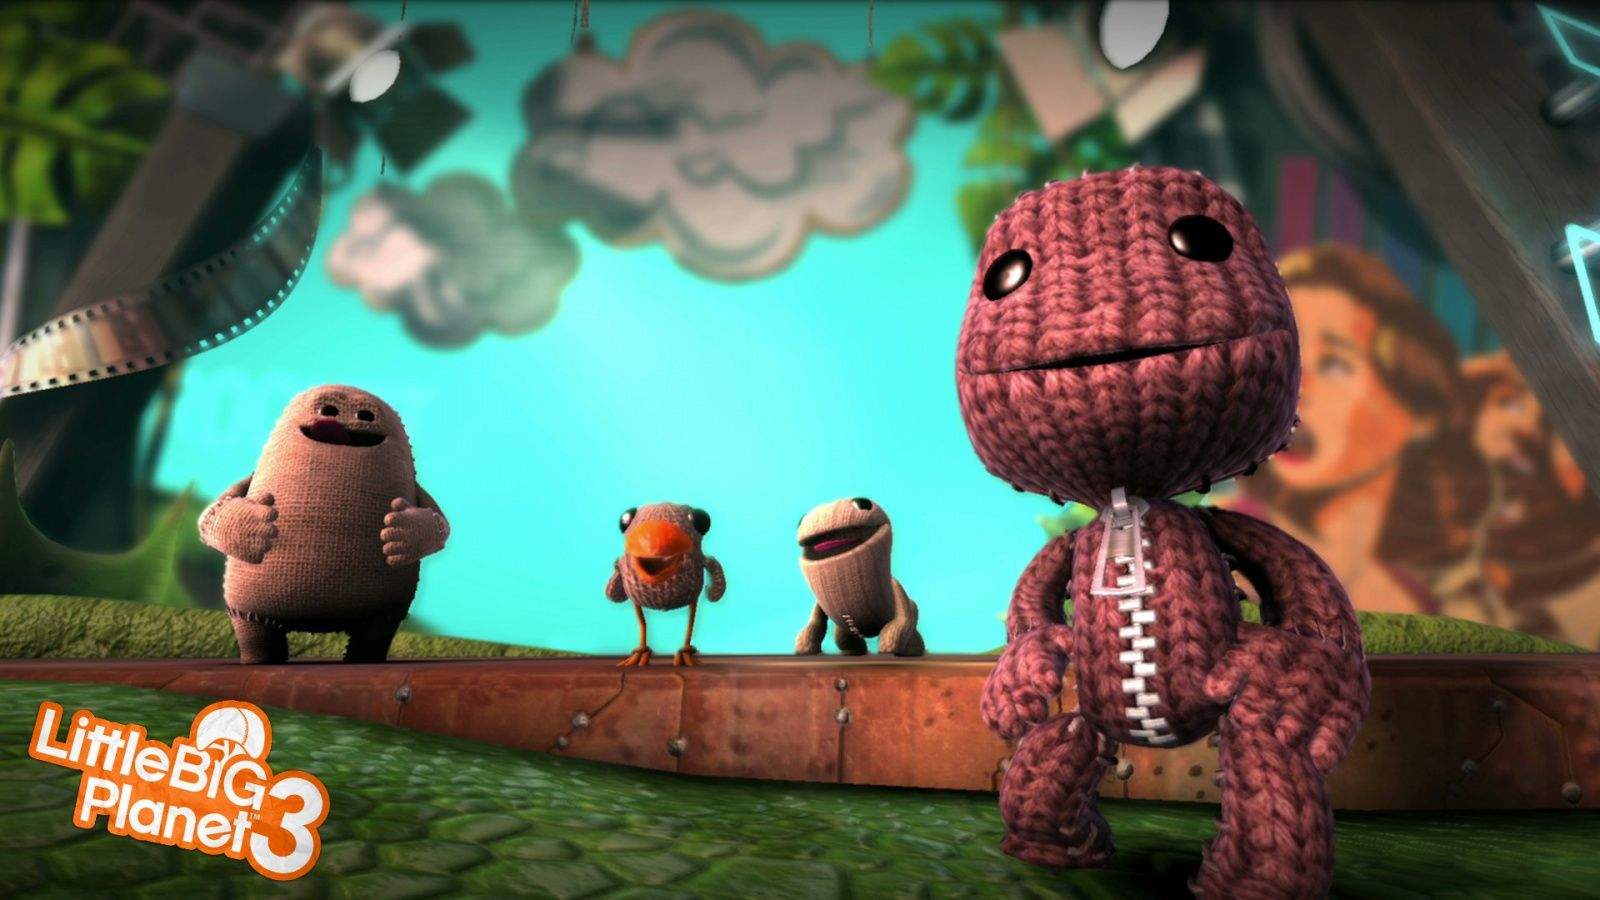 LittleBigPlanet 3 is made of smiles. Photo: Sony